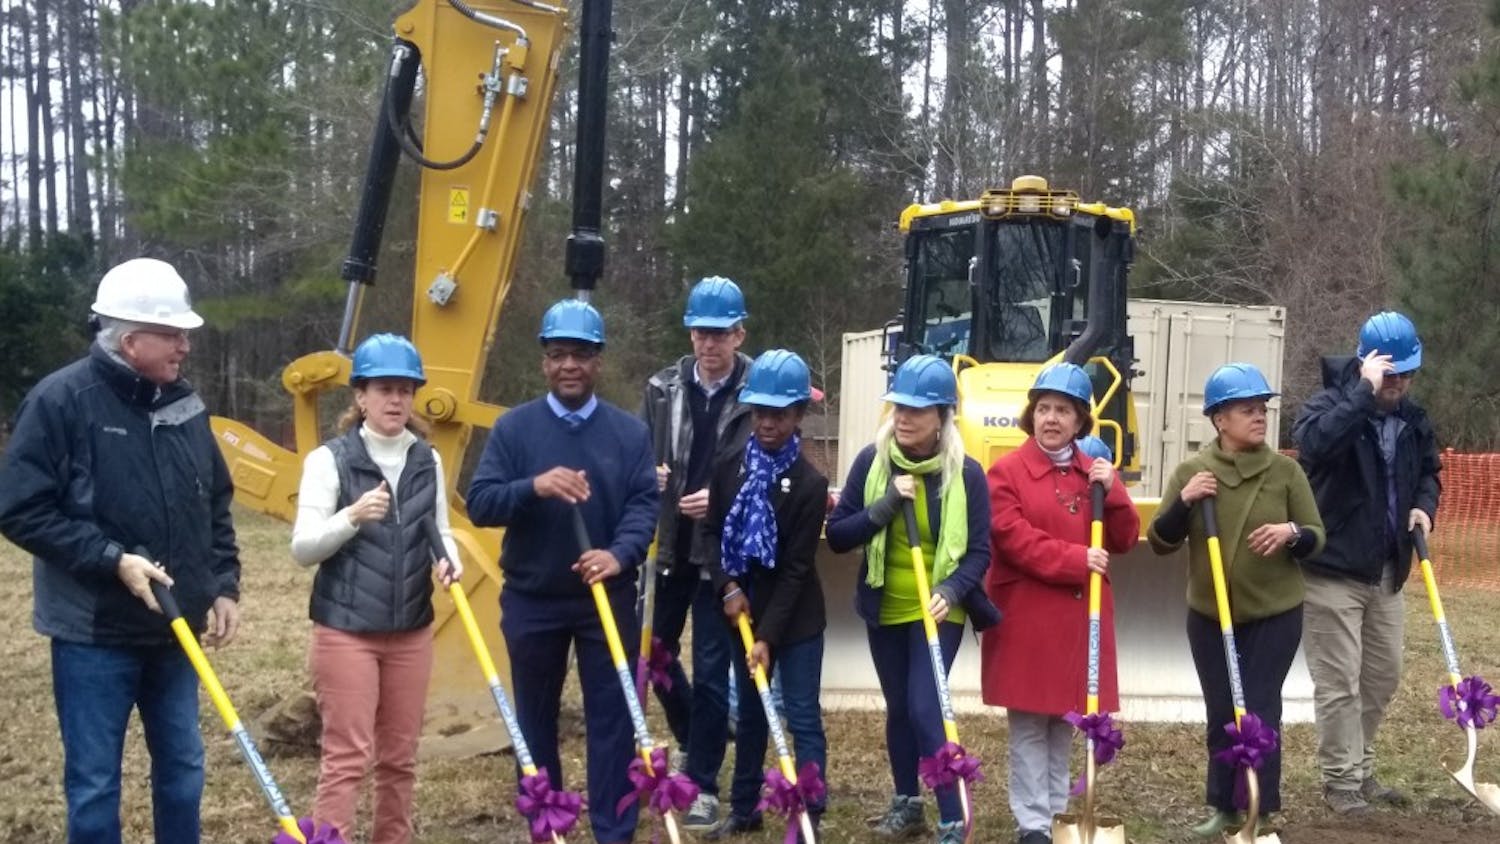 Current and former Carrboro town officials kick off the construction process for the Martin Luther King Jr. Park on Saturday, Jan. 19, 2019.